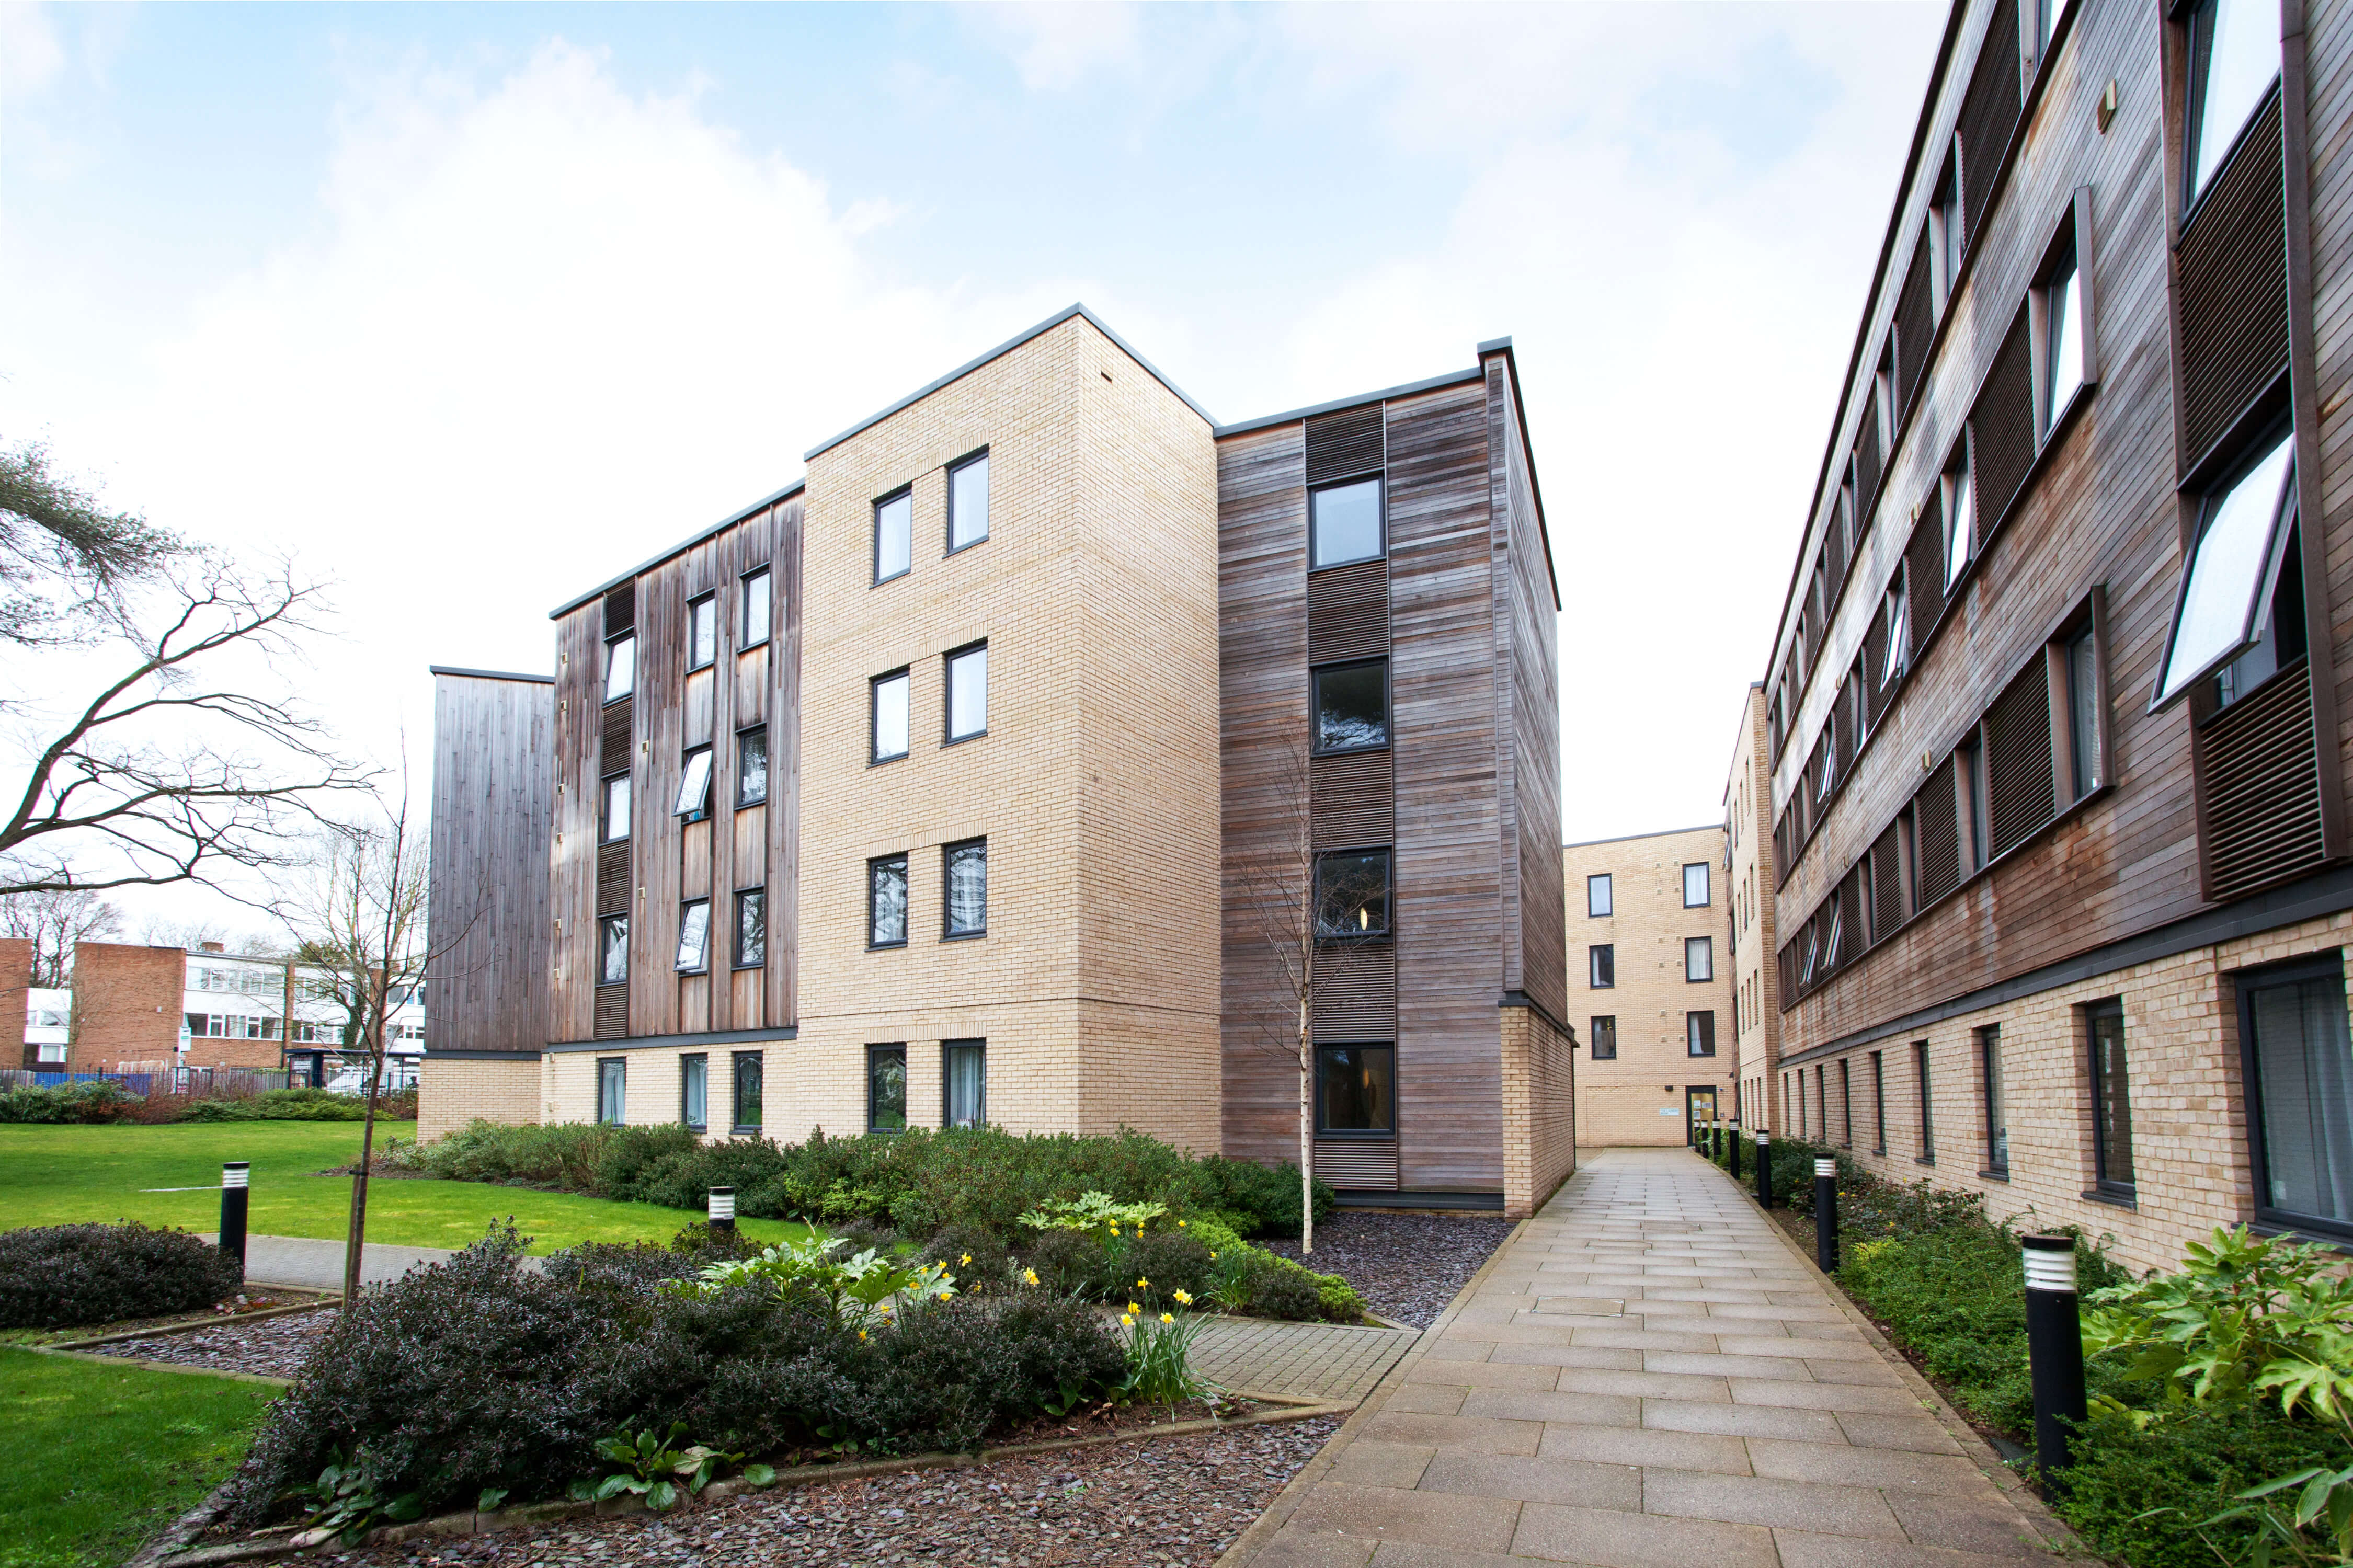 Unite Students accommodation at Dorset House in Oxford